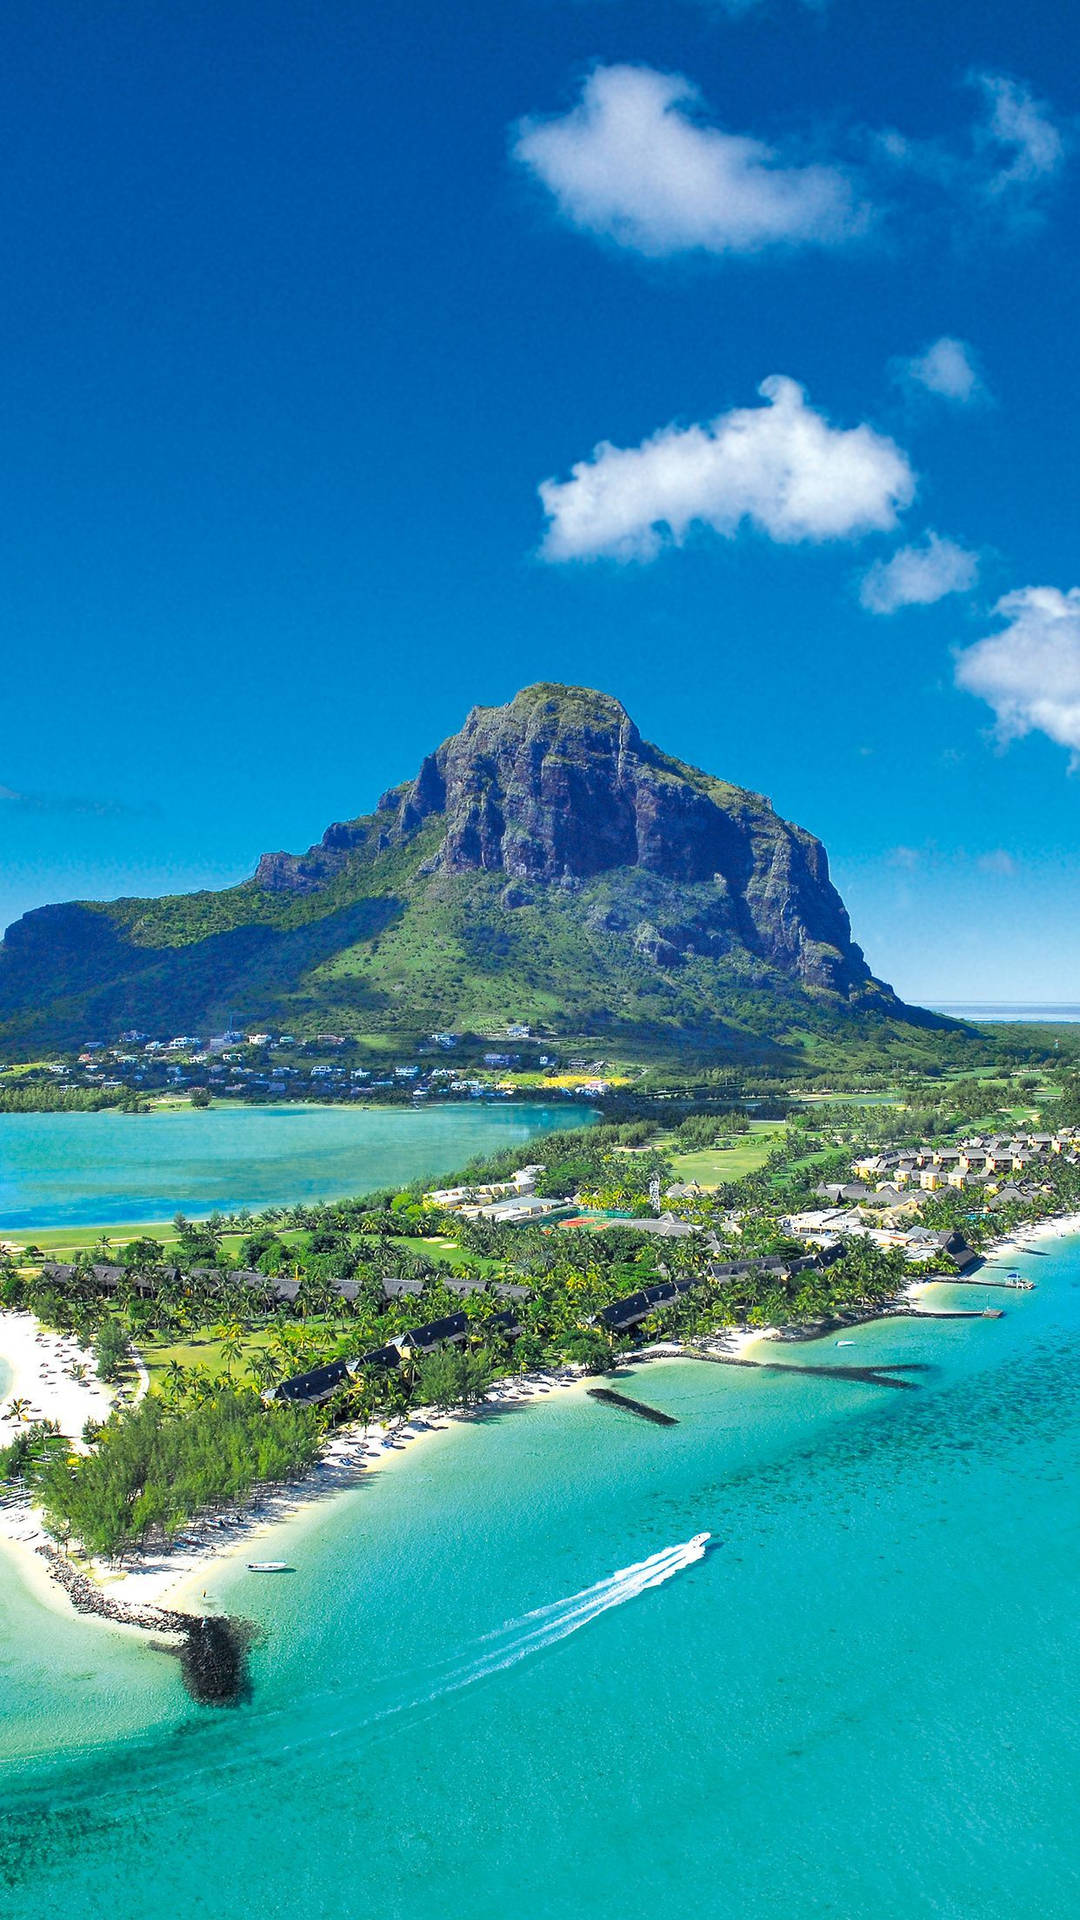 Mountain And City In Mauritius Wallpaper